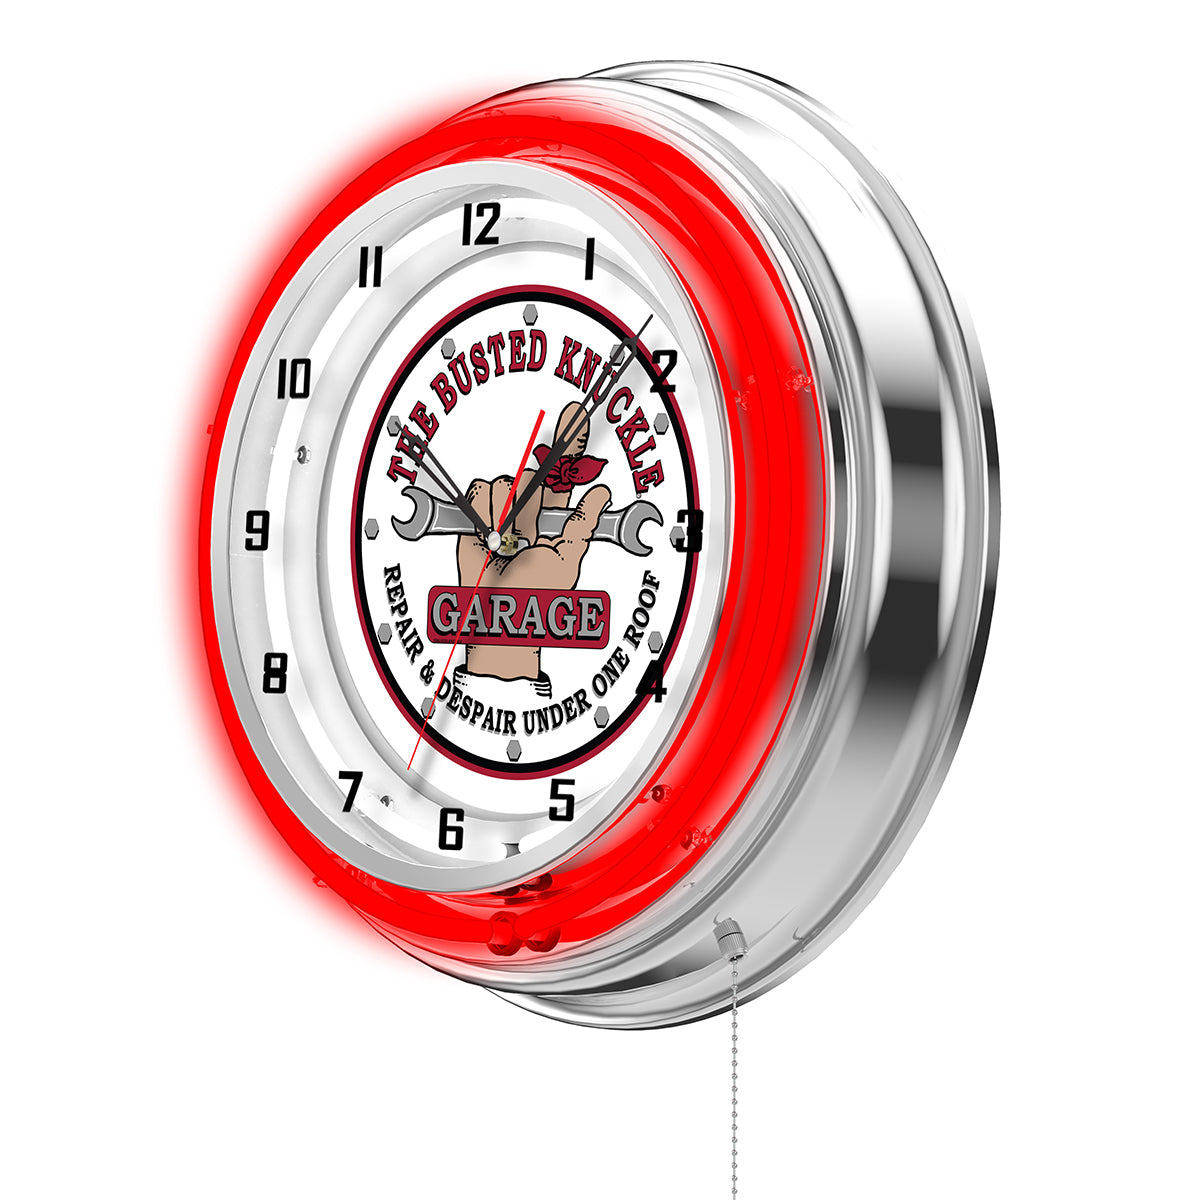 Busted Knuckle Garage Carguy White Logo Clock - Red Neon